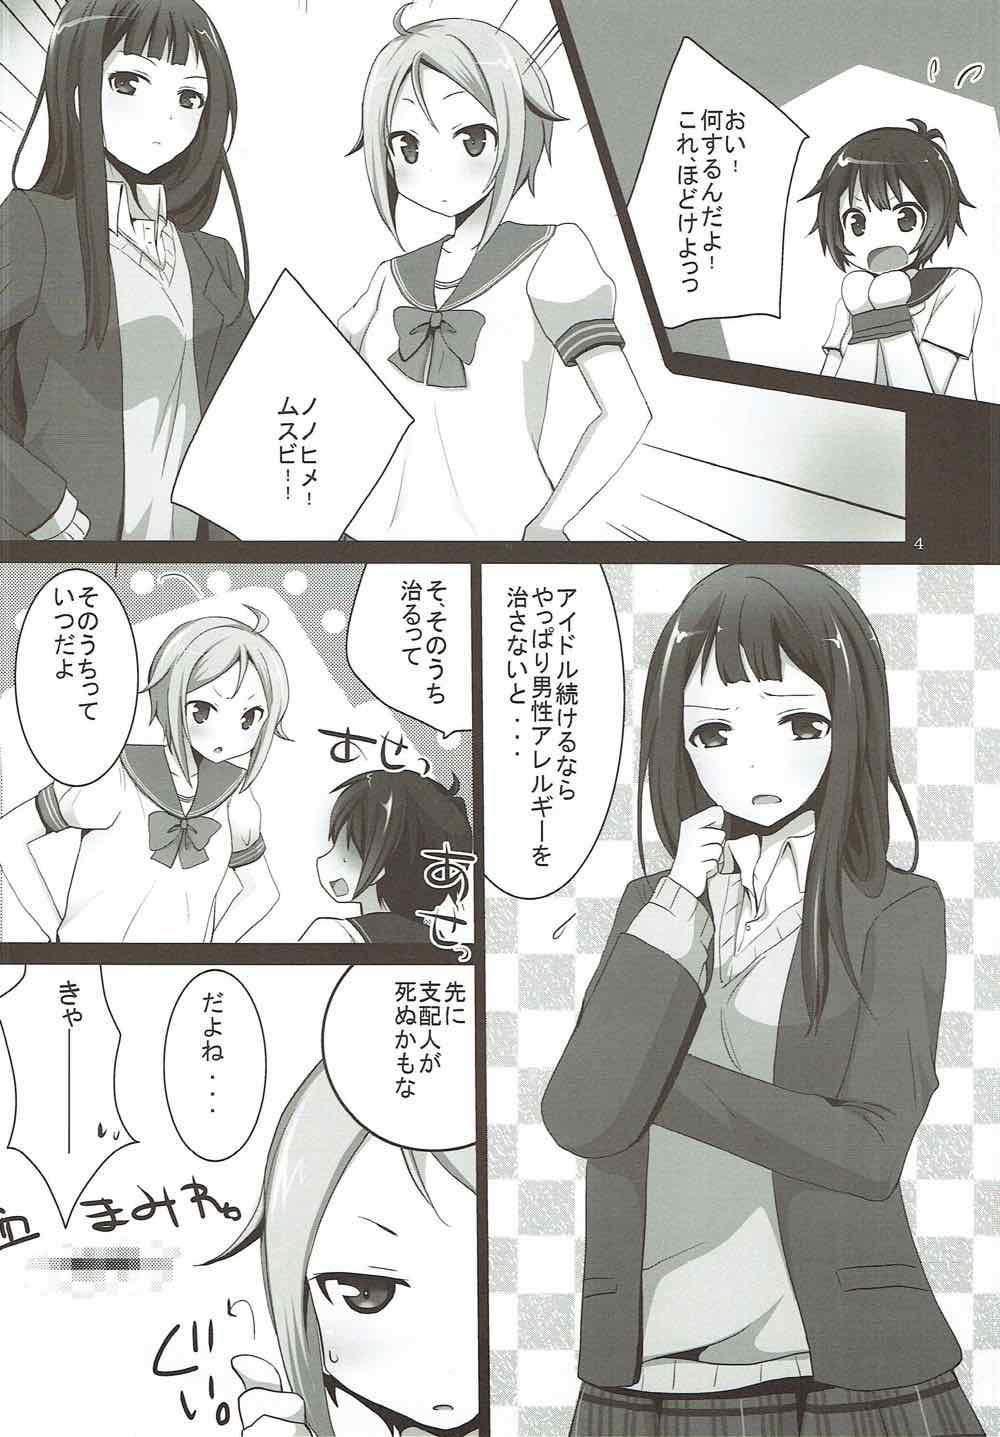 Matures The world which laughs, hello. - Tokyo 7th sisters 3way - Page 3